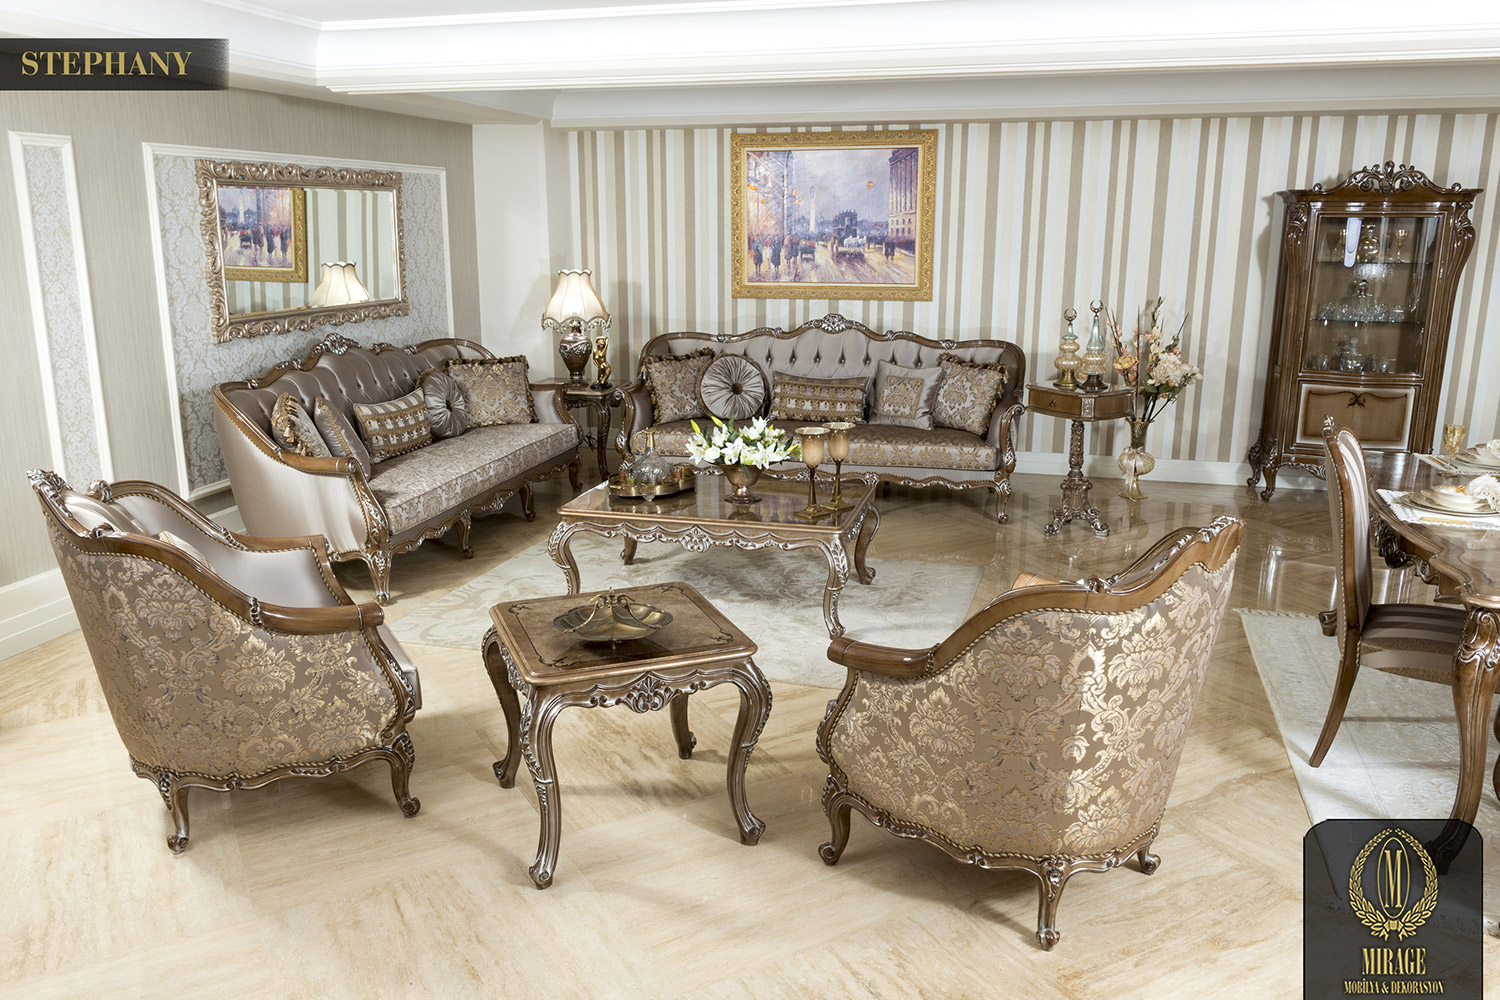 Mirage Furniture - Stephany Living Room